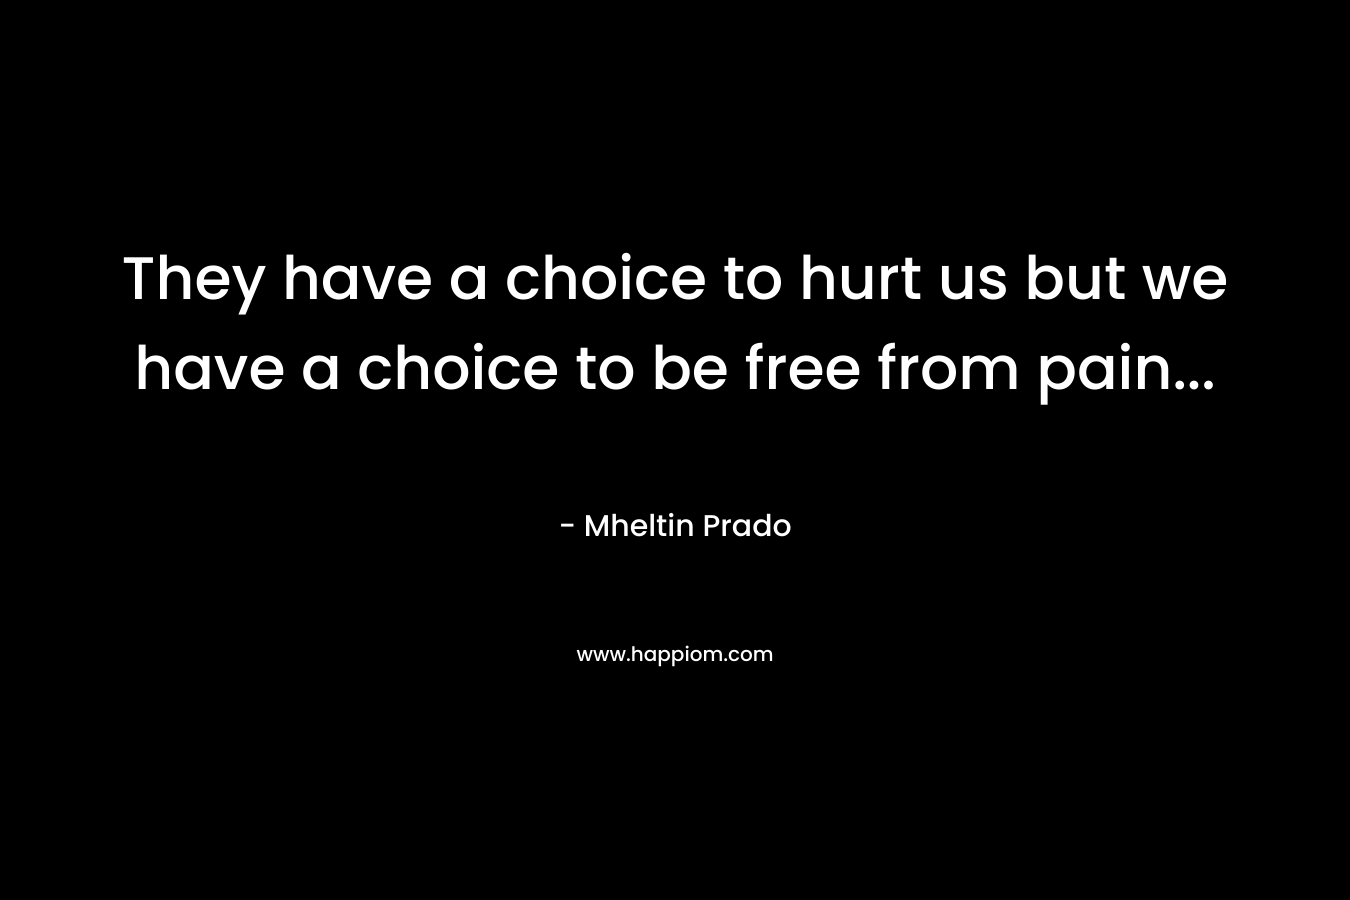 They have a choice to hurt us but we have a choice to be free from pain… – Mheltin Prado